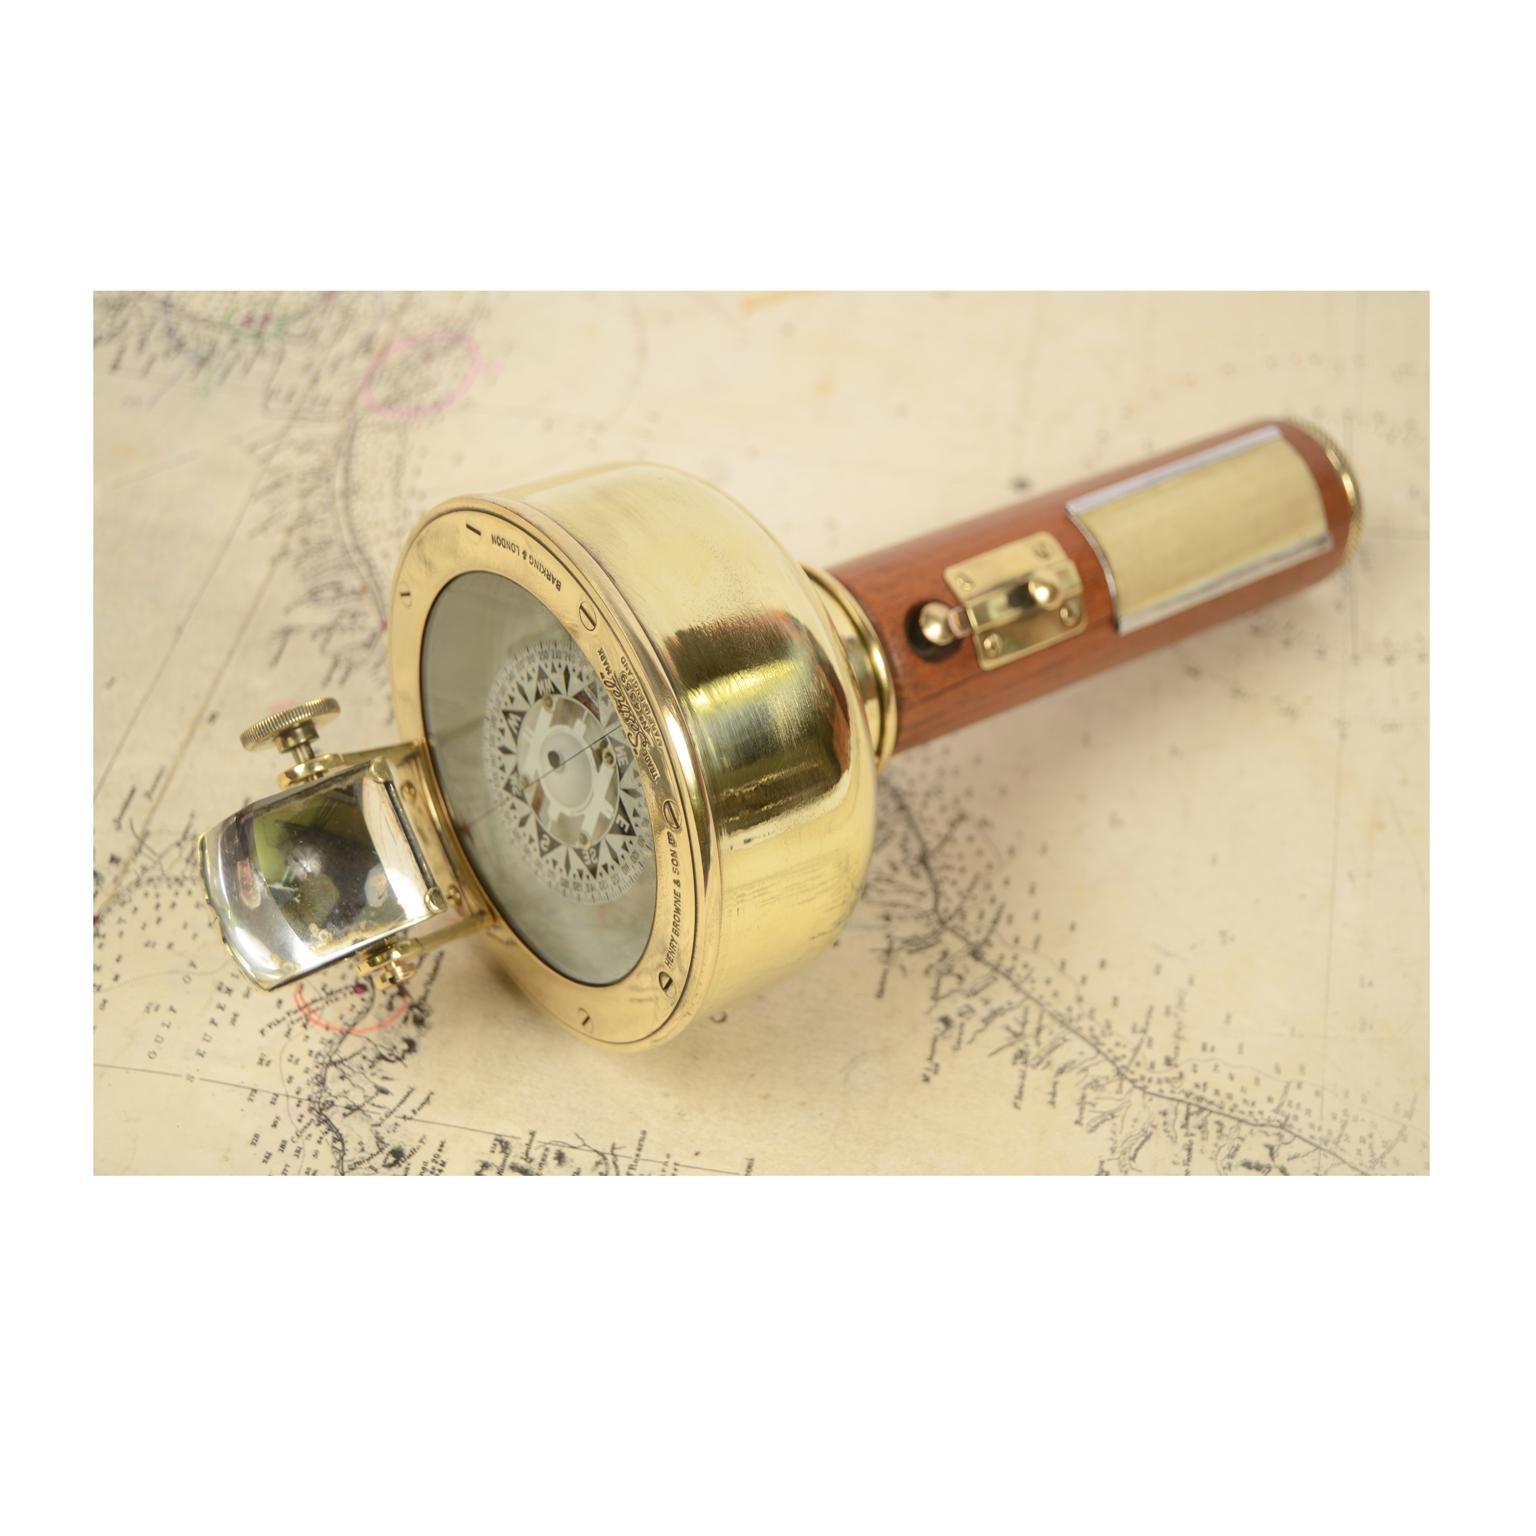 Brass Magnetic Compass Signed Henry Browne & Son Ltd Sestrel, Early 20th Century